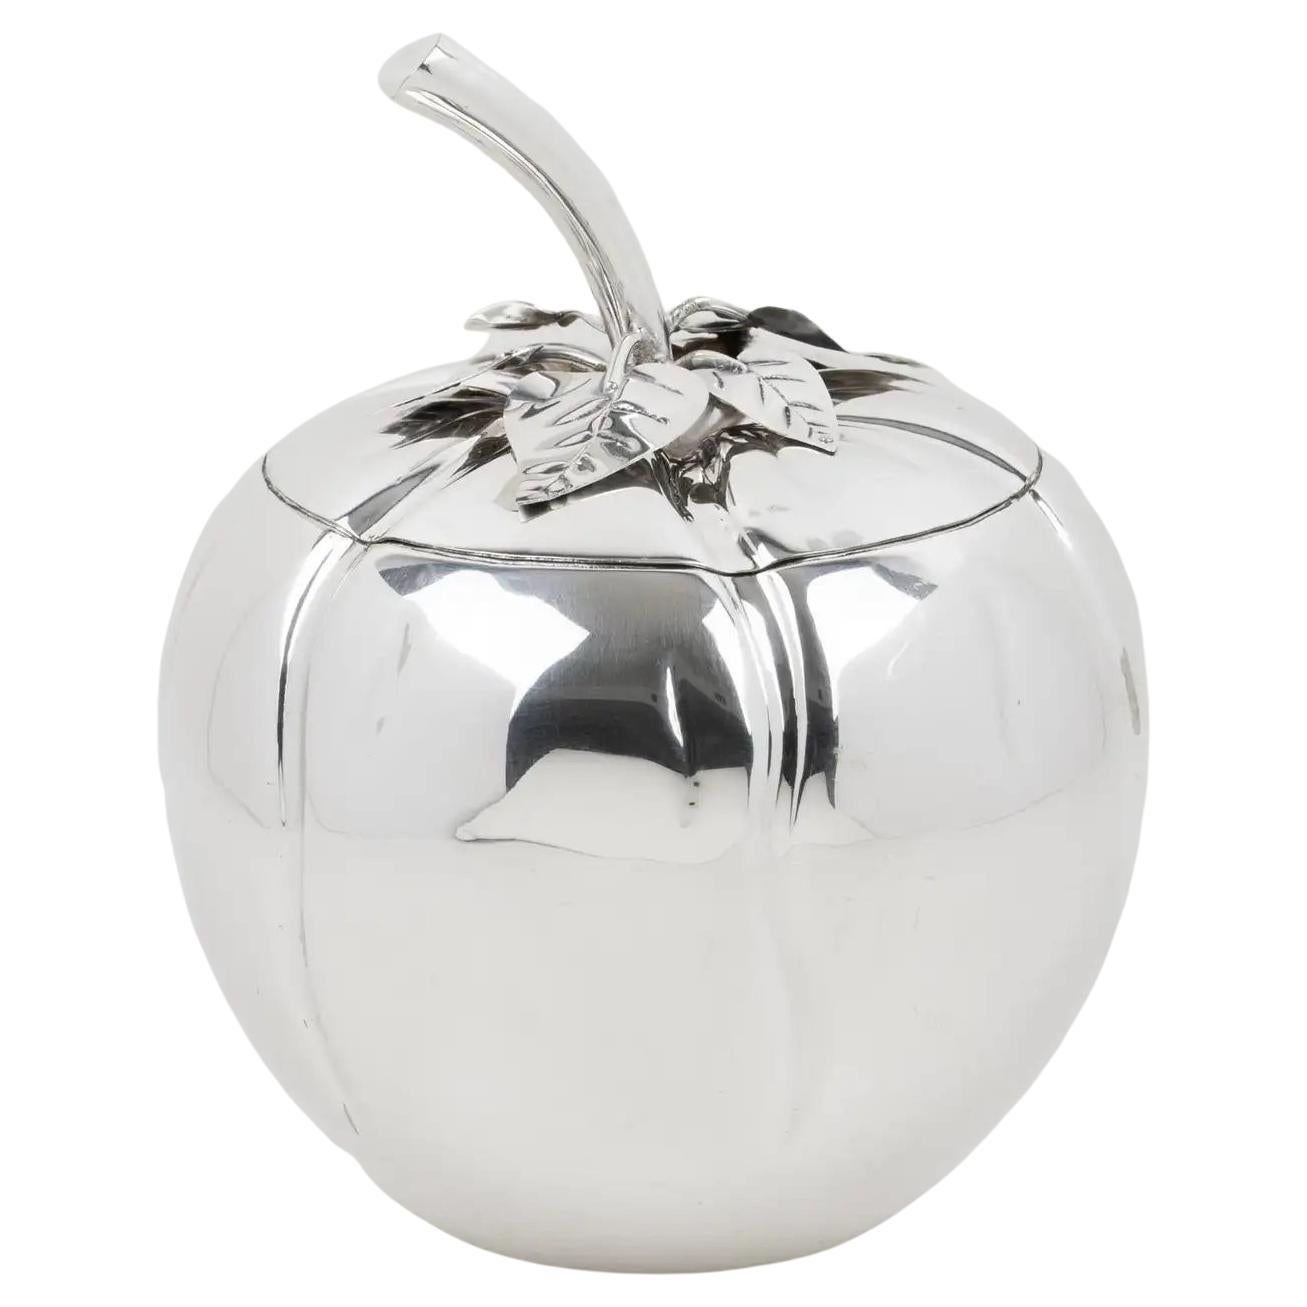 Teghini Firenze Silver Plate Tomato-shaped Ice Bucket, Italy 1960s